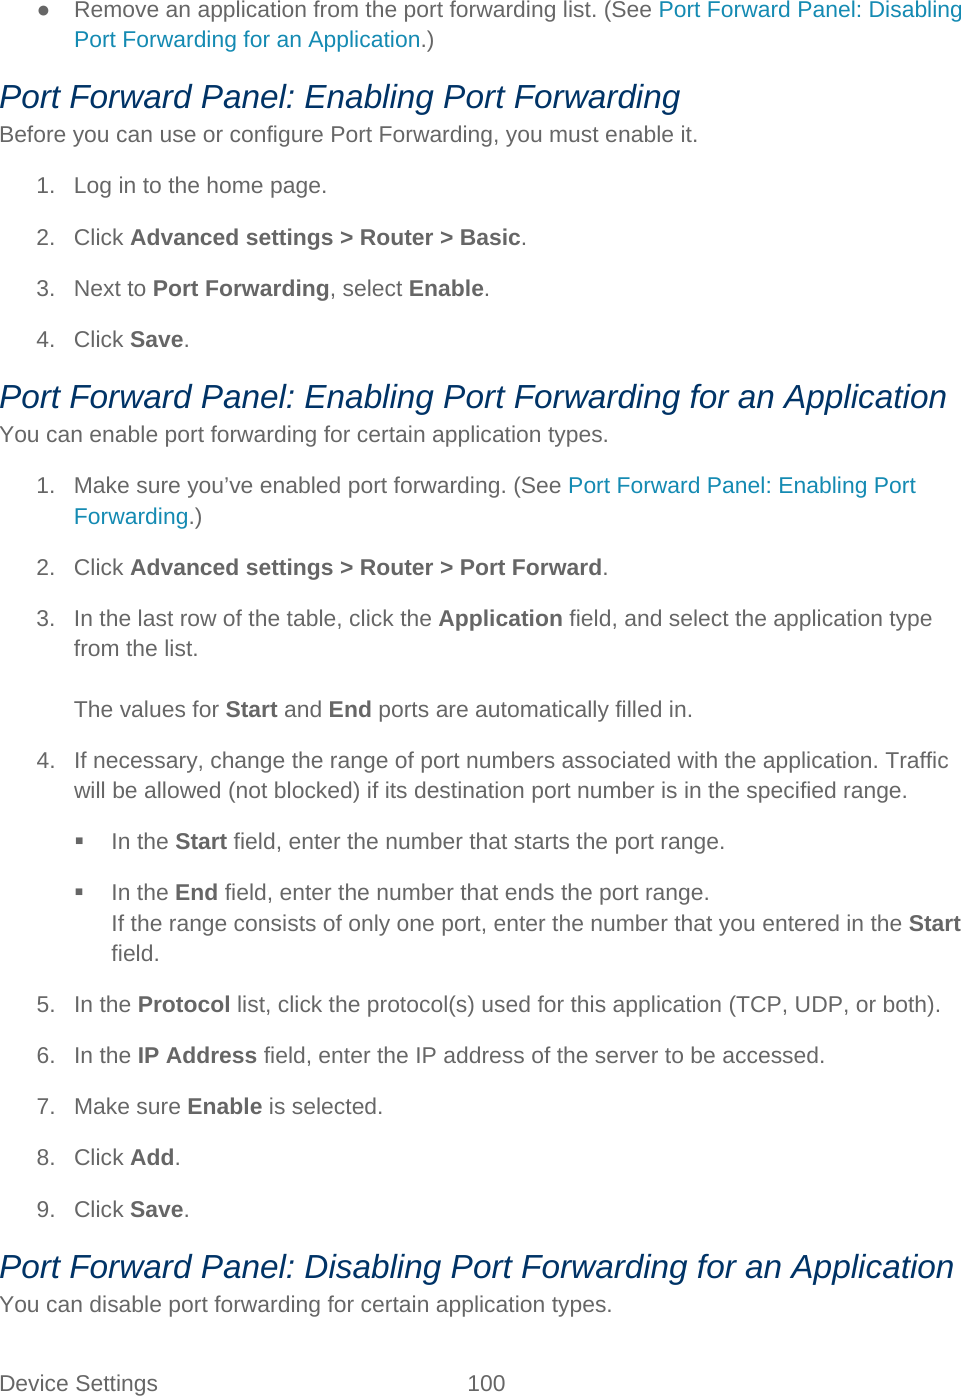 Device Settings 100   ● Remove an application from the port forwarding list. (See Port Forward Panel: Disabling Port Forwarding for an Application.) Port Forward Panel: Enabling Port Forwarding Before you can use or configure Port Forwarding, you must enable it. 1. Log in to the home page. 2. Click Advanced settings &gt; Router &gt; Basic. 3. Next to Port Forwarding, select Enable. 4. Click Save. Port Forward Panel: Enabling Port Forwarding for an Application You can enable port forwarding for certain application types. 1. Make sure you’ve enabled port forwarding. (See Port Forward Panel: Enabling Port Forwarding.) 2. Click Advanced settings &gt; Router &gt; Port Forward. 3. In the last row of the table, click the Application field, and select the application type from the list.  The values for Start and End ports are automatically filled in. 4. If necessary, change the range of port numbers associated with the application. Traffic will be allowed (not blocked) if its destination port number is in the specified range.  In the Start field, enter the number that starts the port range.  In the End field, enter the number that ends the port range. If the range consists of only one port, enter the number that you entered in the Start field. 5. In the Protocol list, click the protocol(s) used for this application (TCP, UDP, or both). 6. In the IP Address field, enter the IP address of the server to be accessed. 7. Make sure Enable is selected. 8. Click Add. 9. Click Save. Port Forward Panel: Disabling Port Forwarding for an Application You can disable port forwarding for certain application types. 